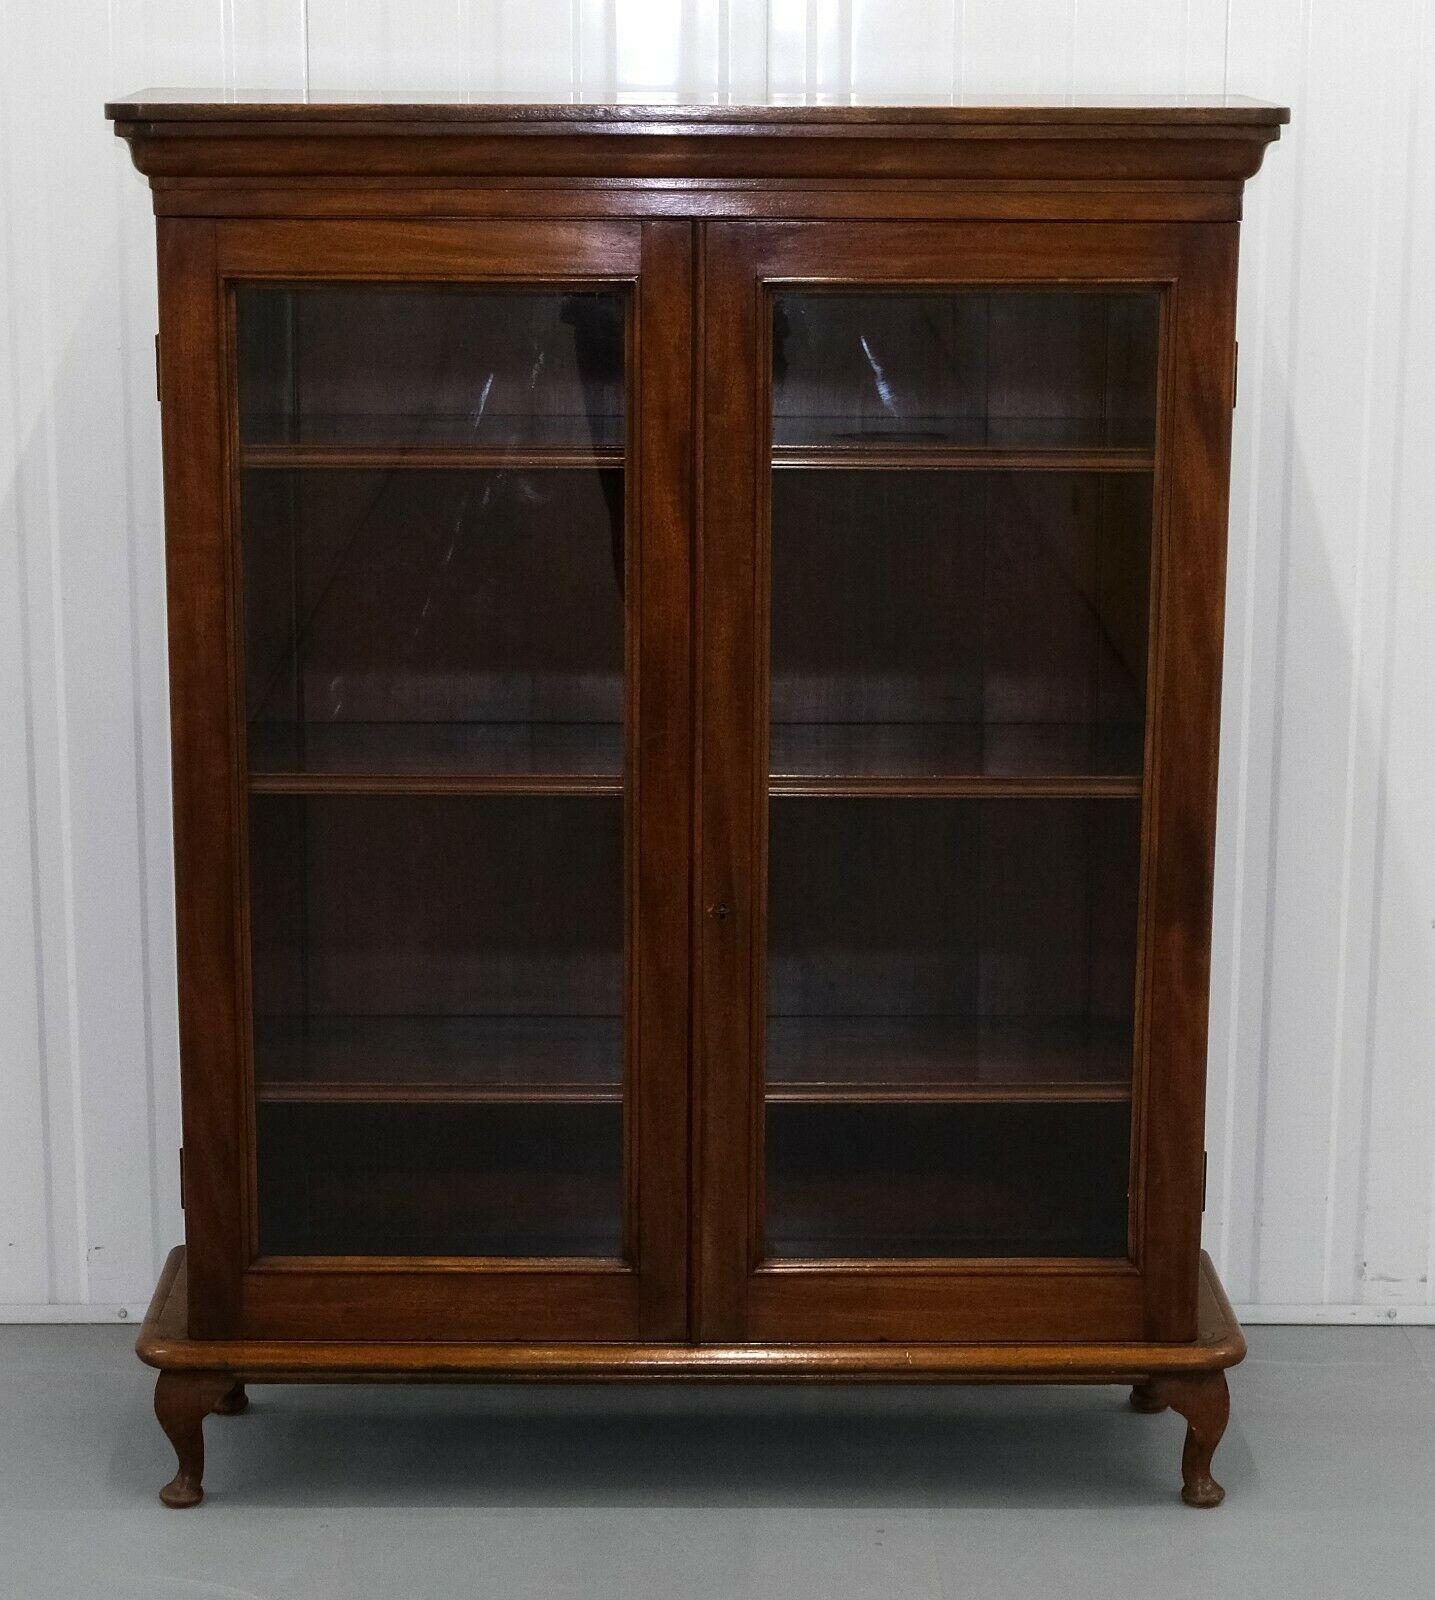 Victorian Rich Brown Hardwood Bookcase Two Doors & Adjustable Shelves on Cabriole Legs